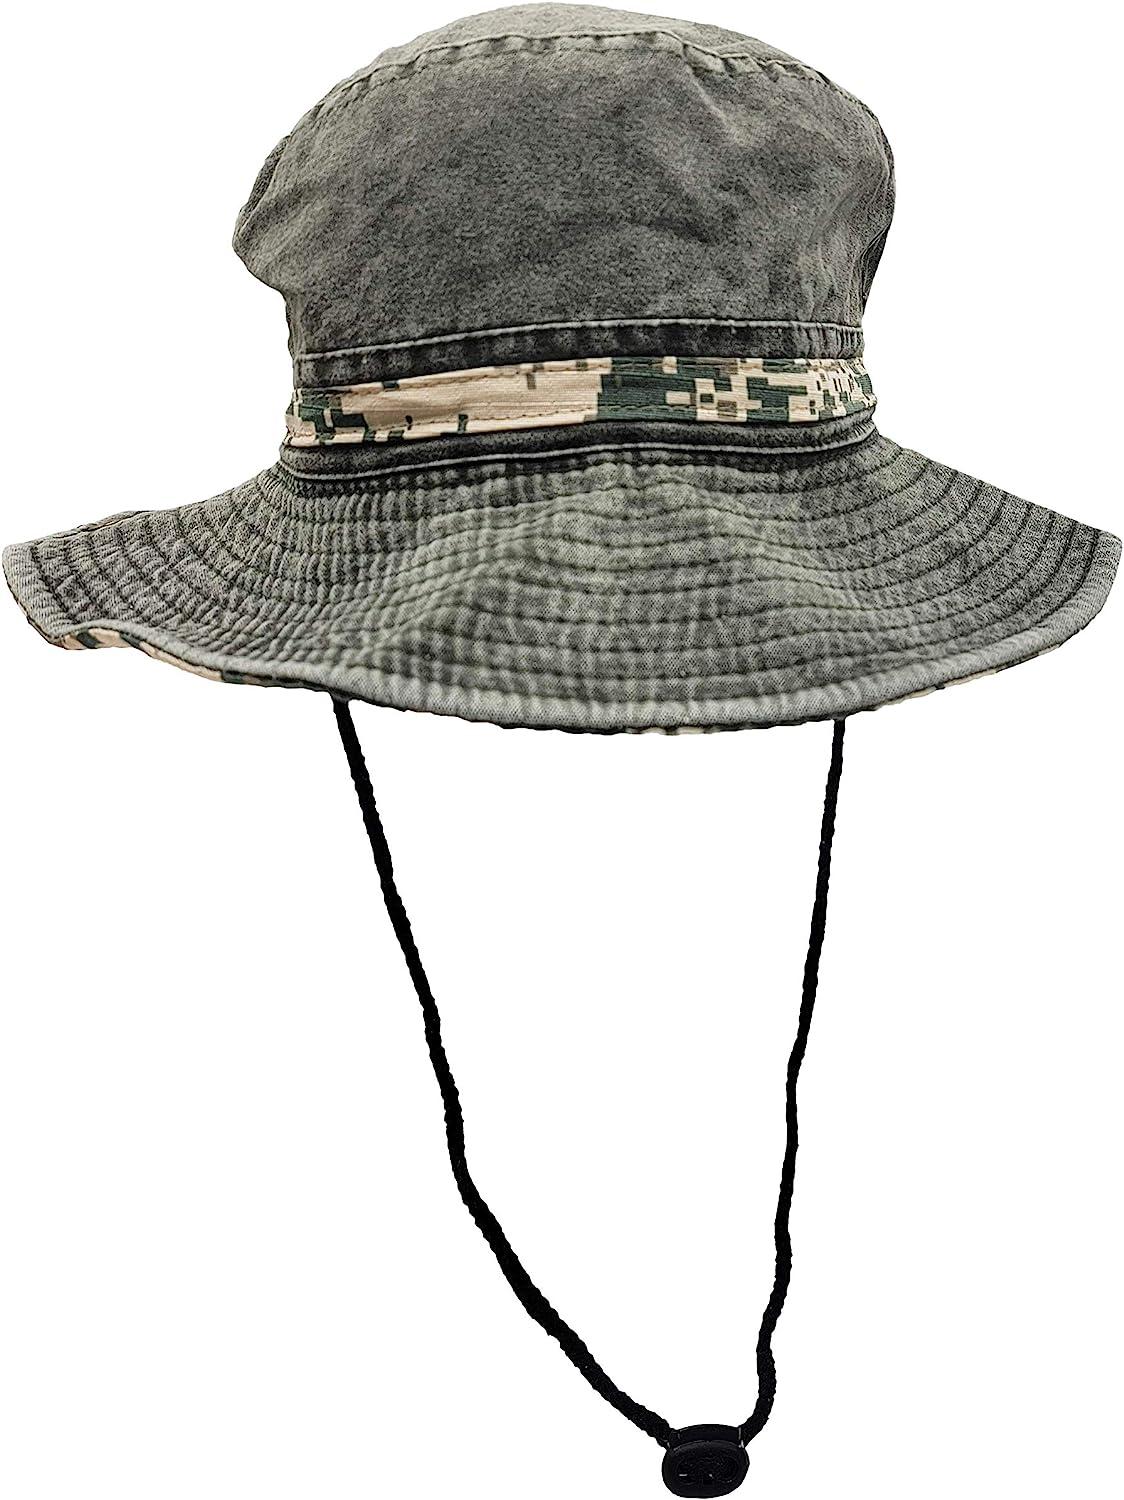 Camouflaged Men's Bucket Hats - Blend Into Nature with Style and Functionality